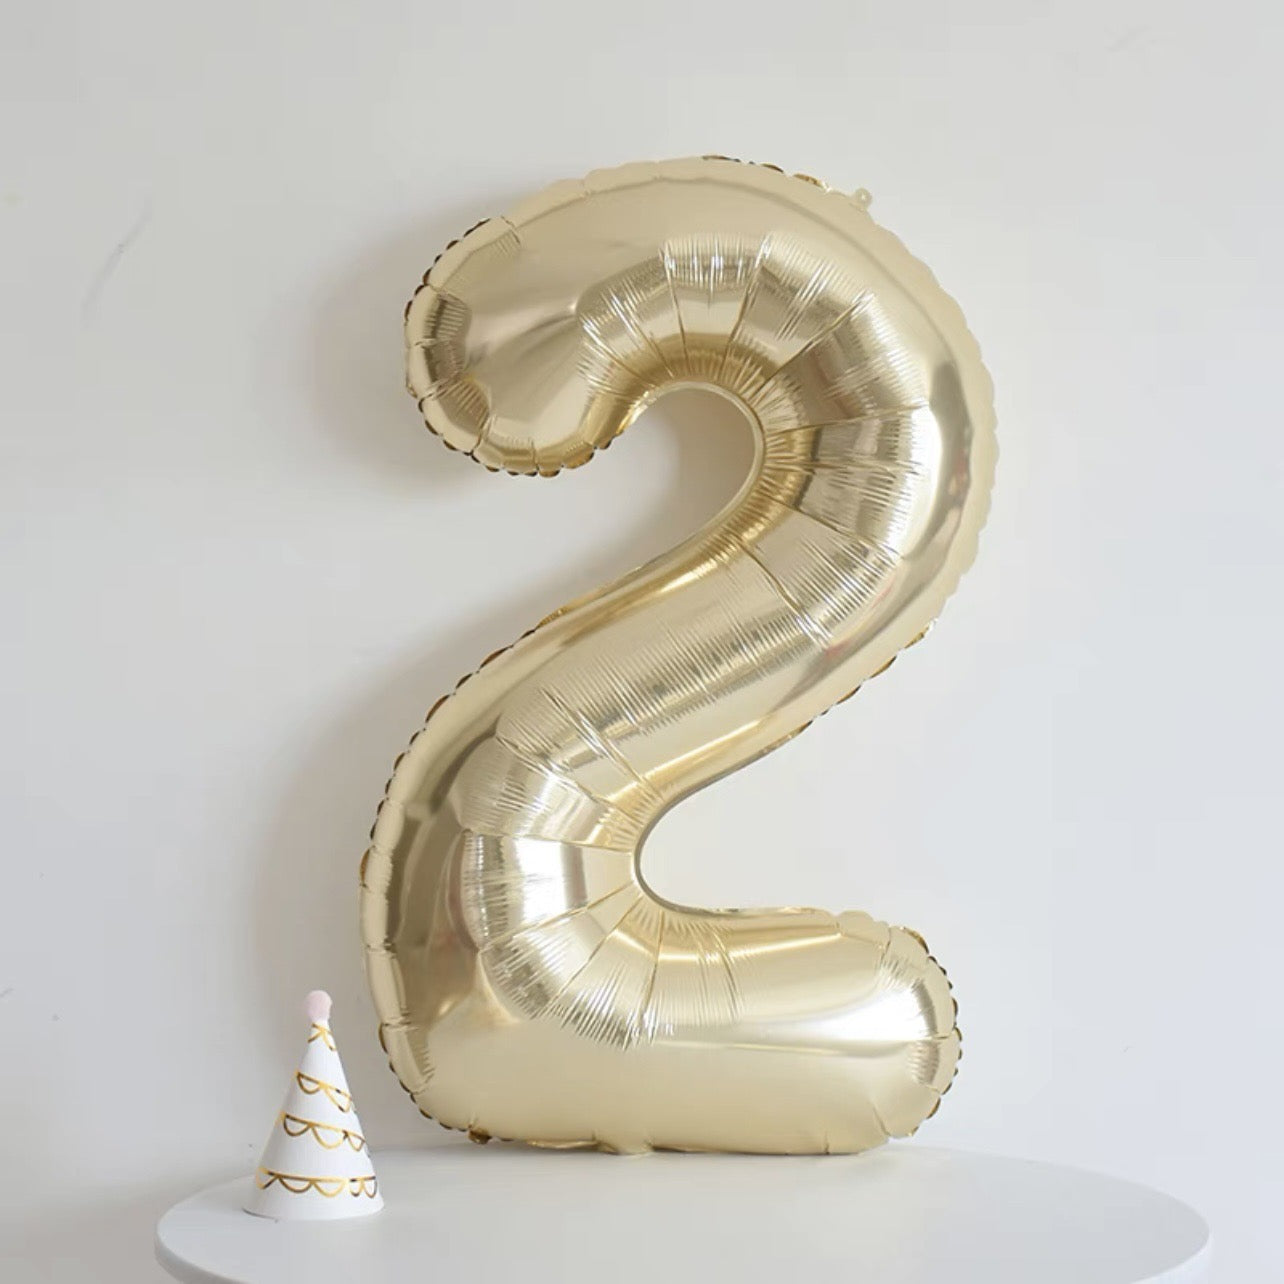 40inch number foil balloons - white gold [HELIUM] ✨👑🌟